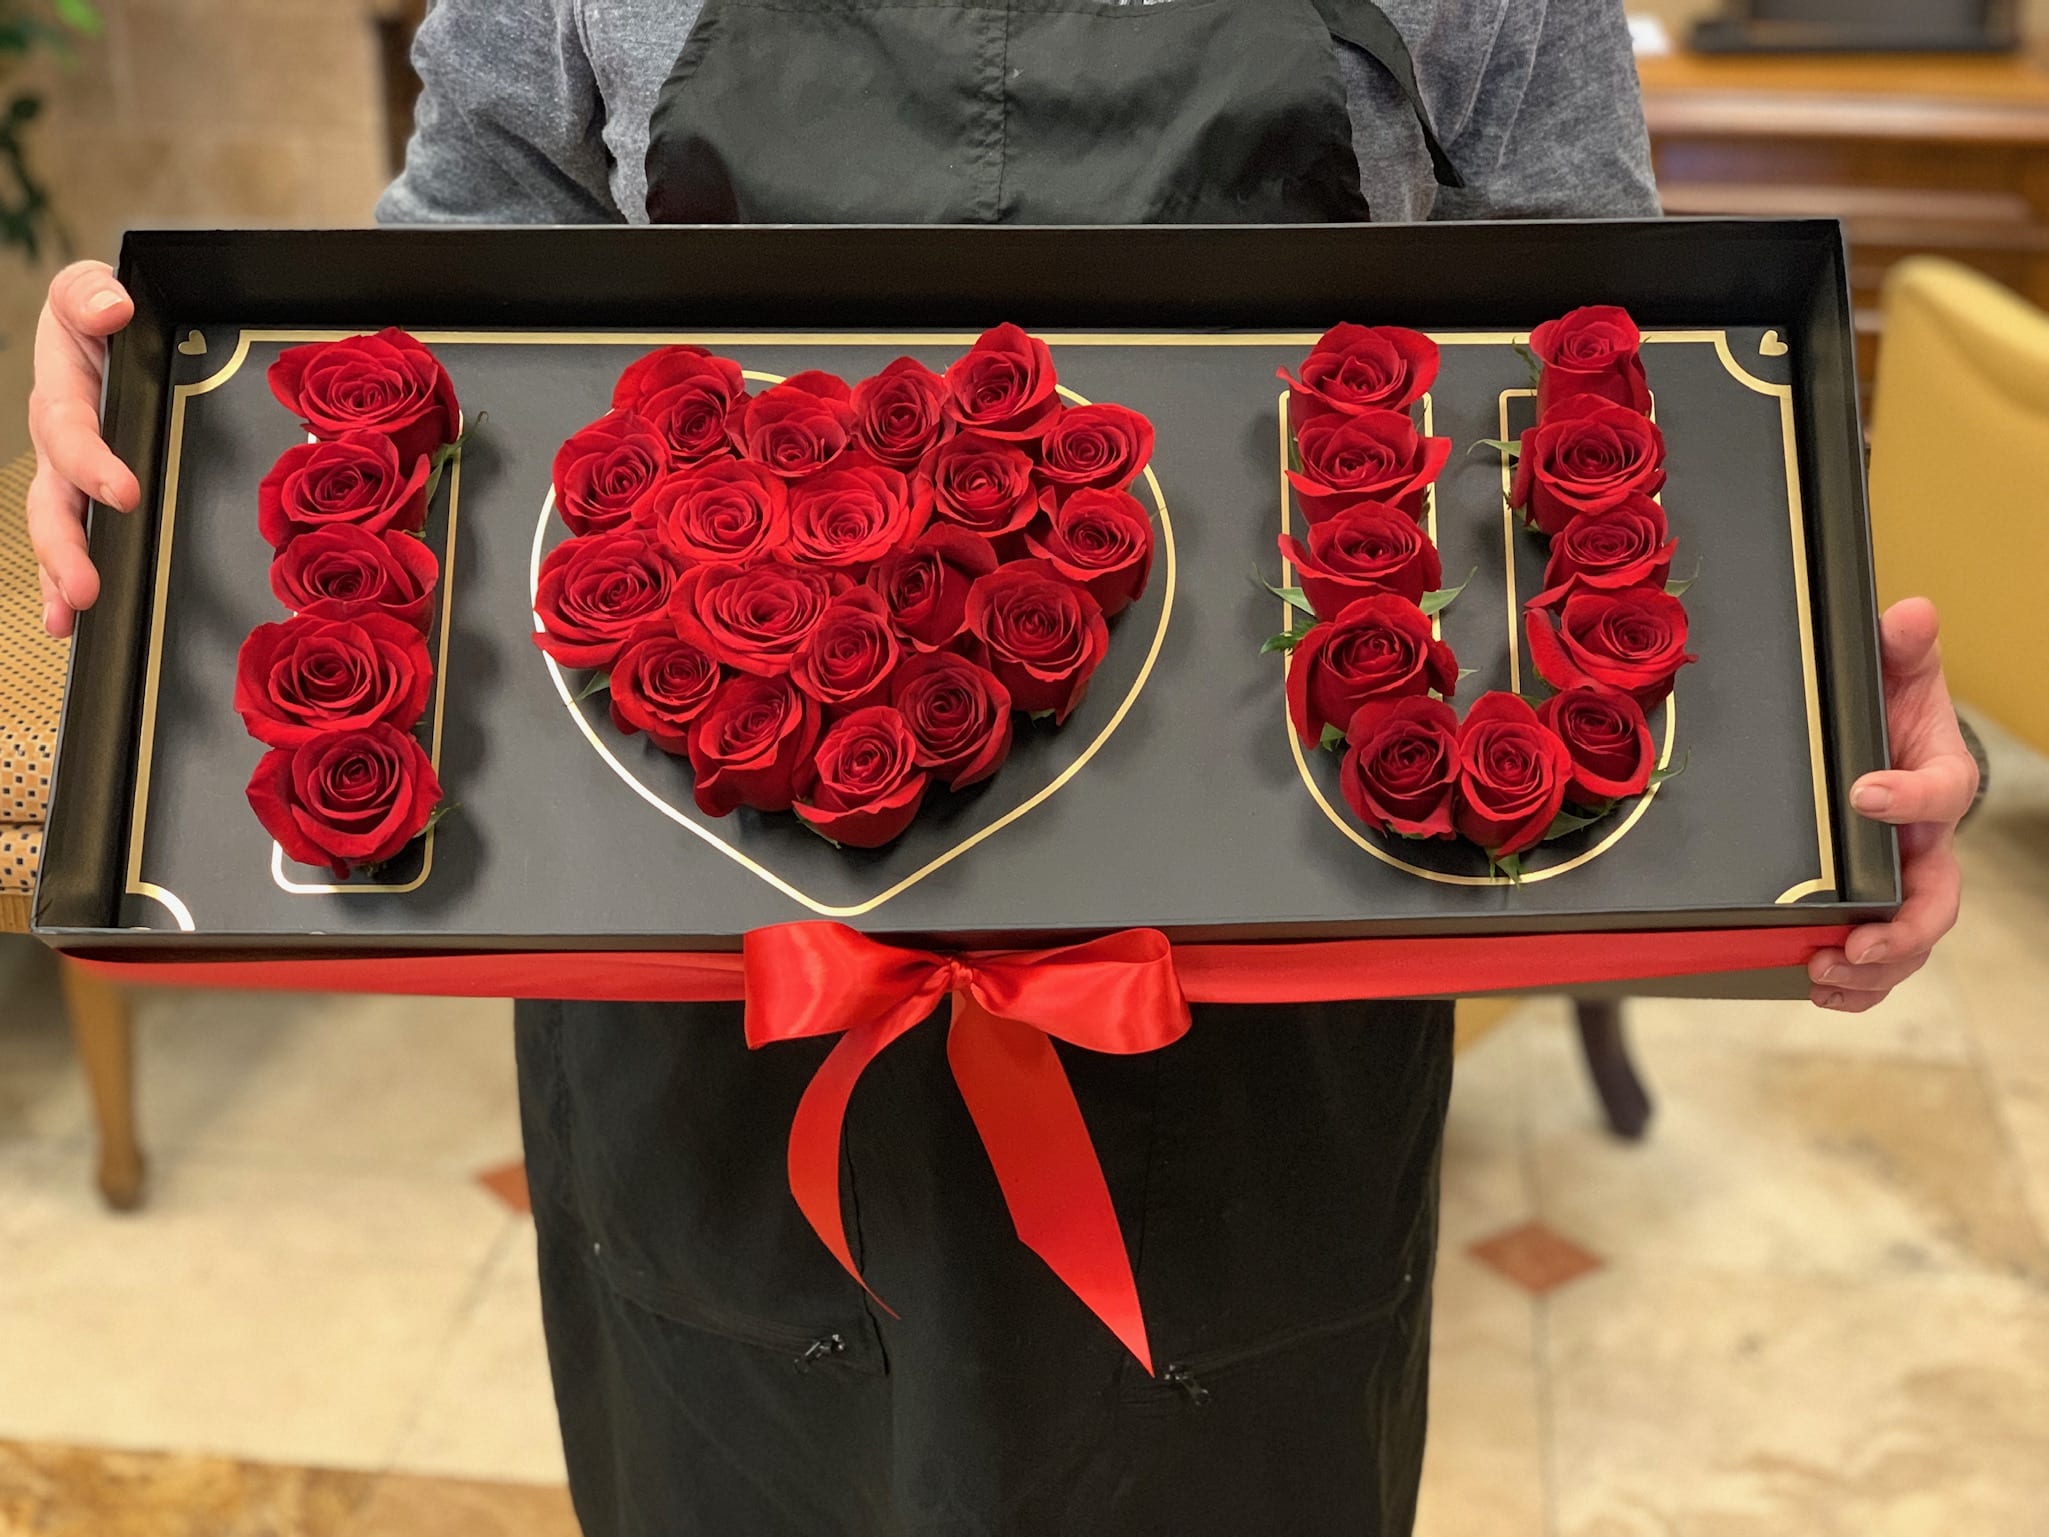 Deep Love Presentation Gift Box with Fresh Roses in Las Vegas, NV | VIP  Floral Designs